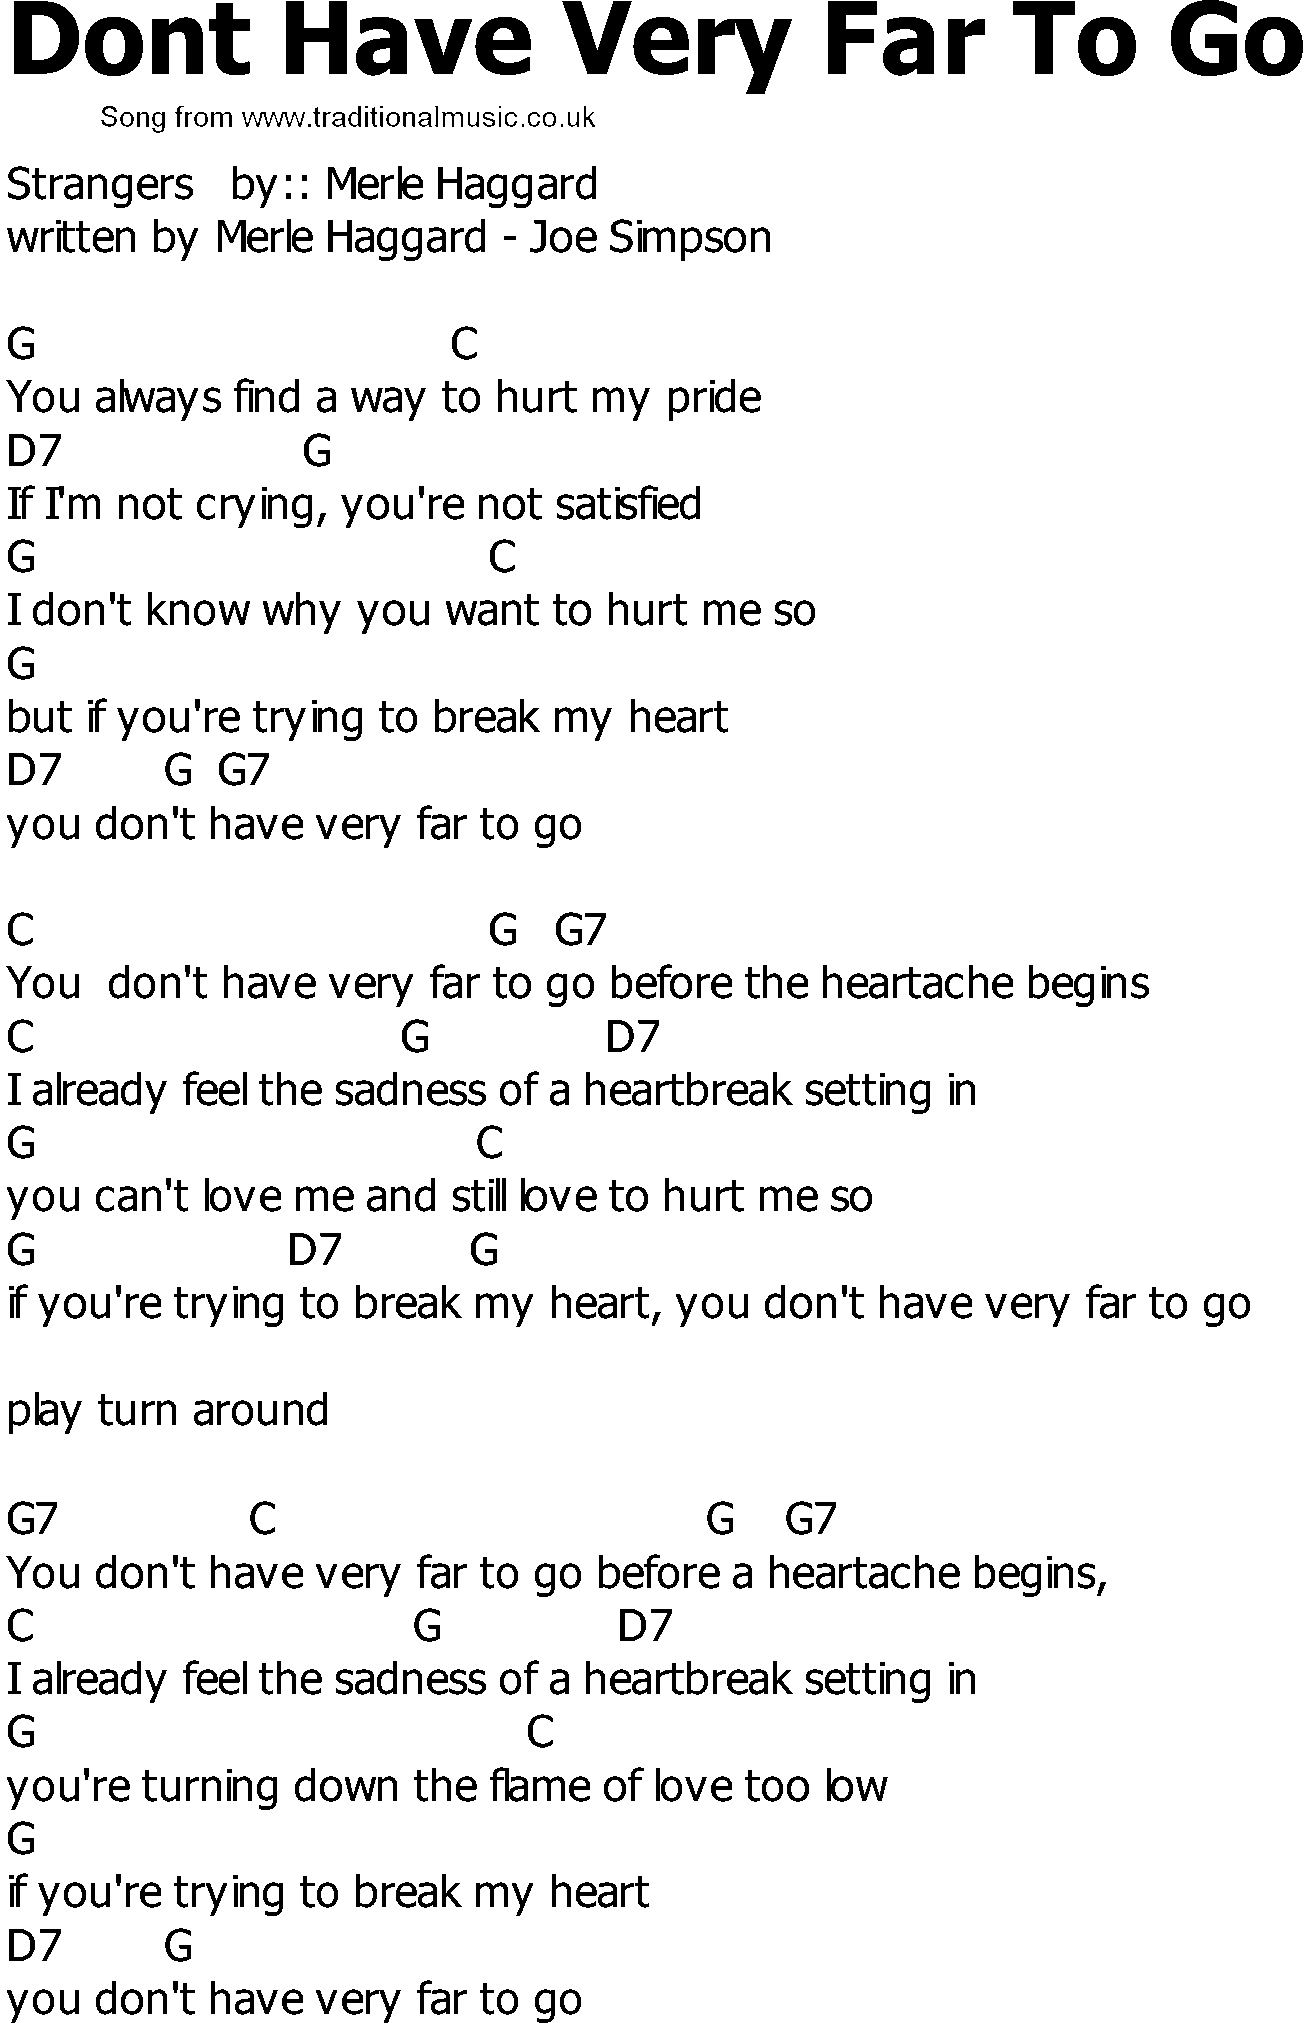 Old Country song lyrics with chords - Dont Have Very Far To Go